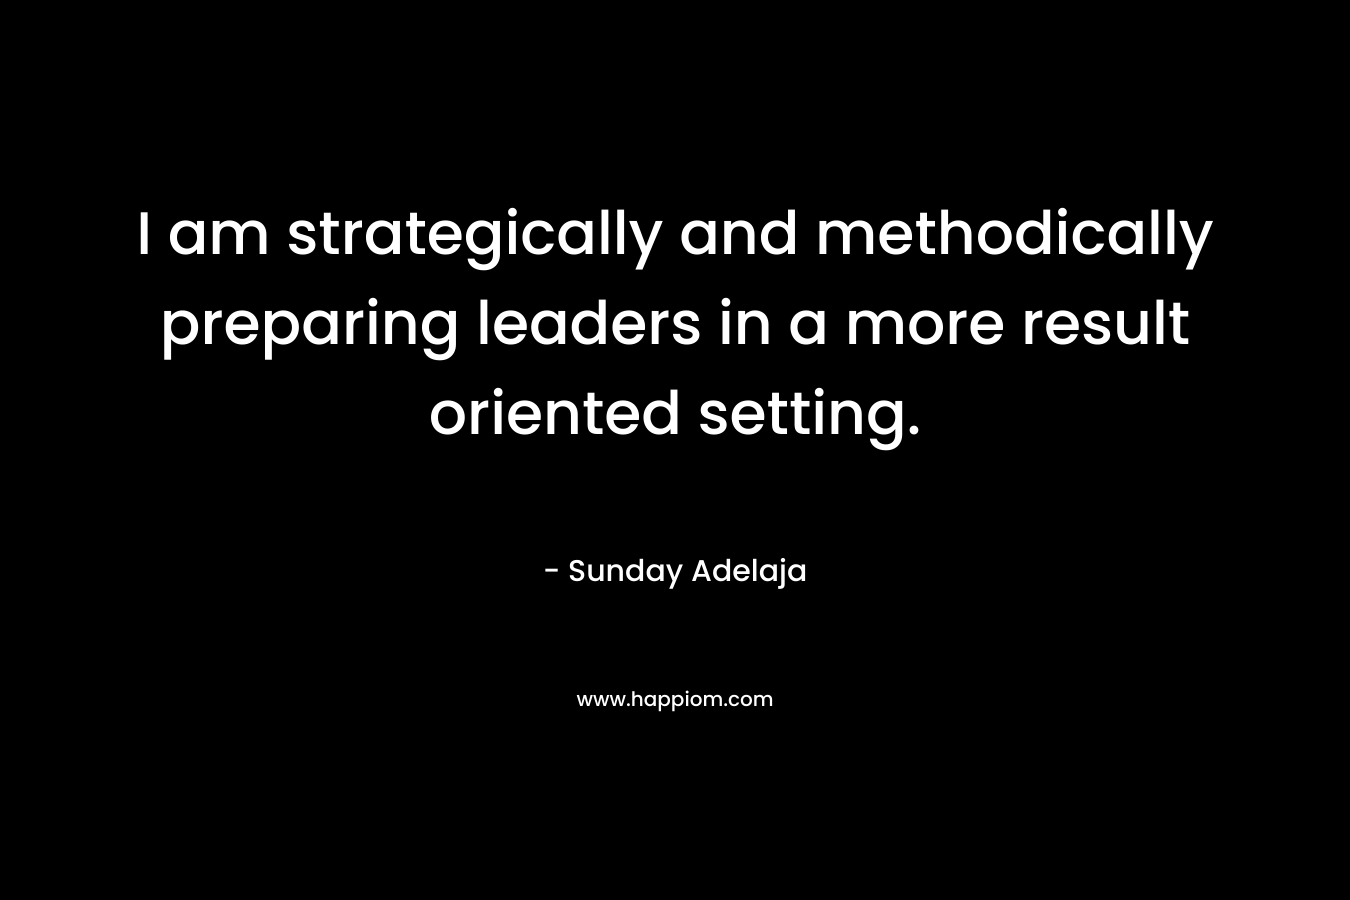 I am strategically and methodically preparing leaders in a more result oriented setting. – Sunday Adelaja